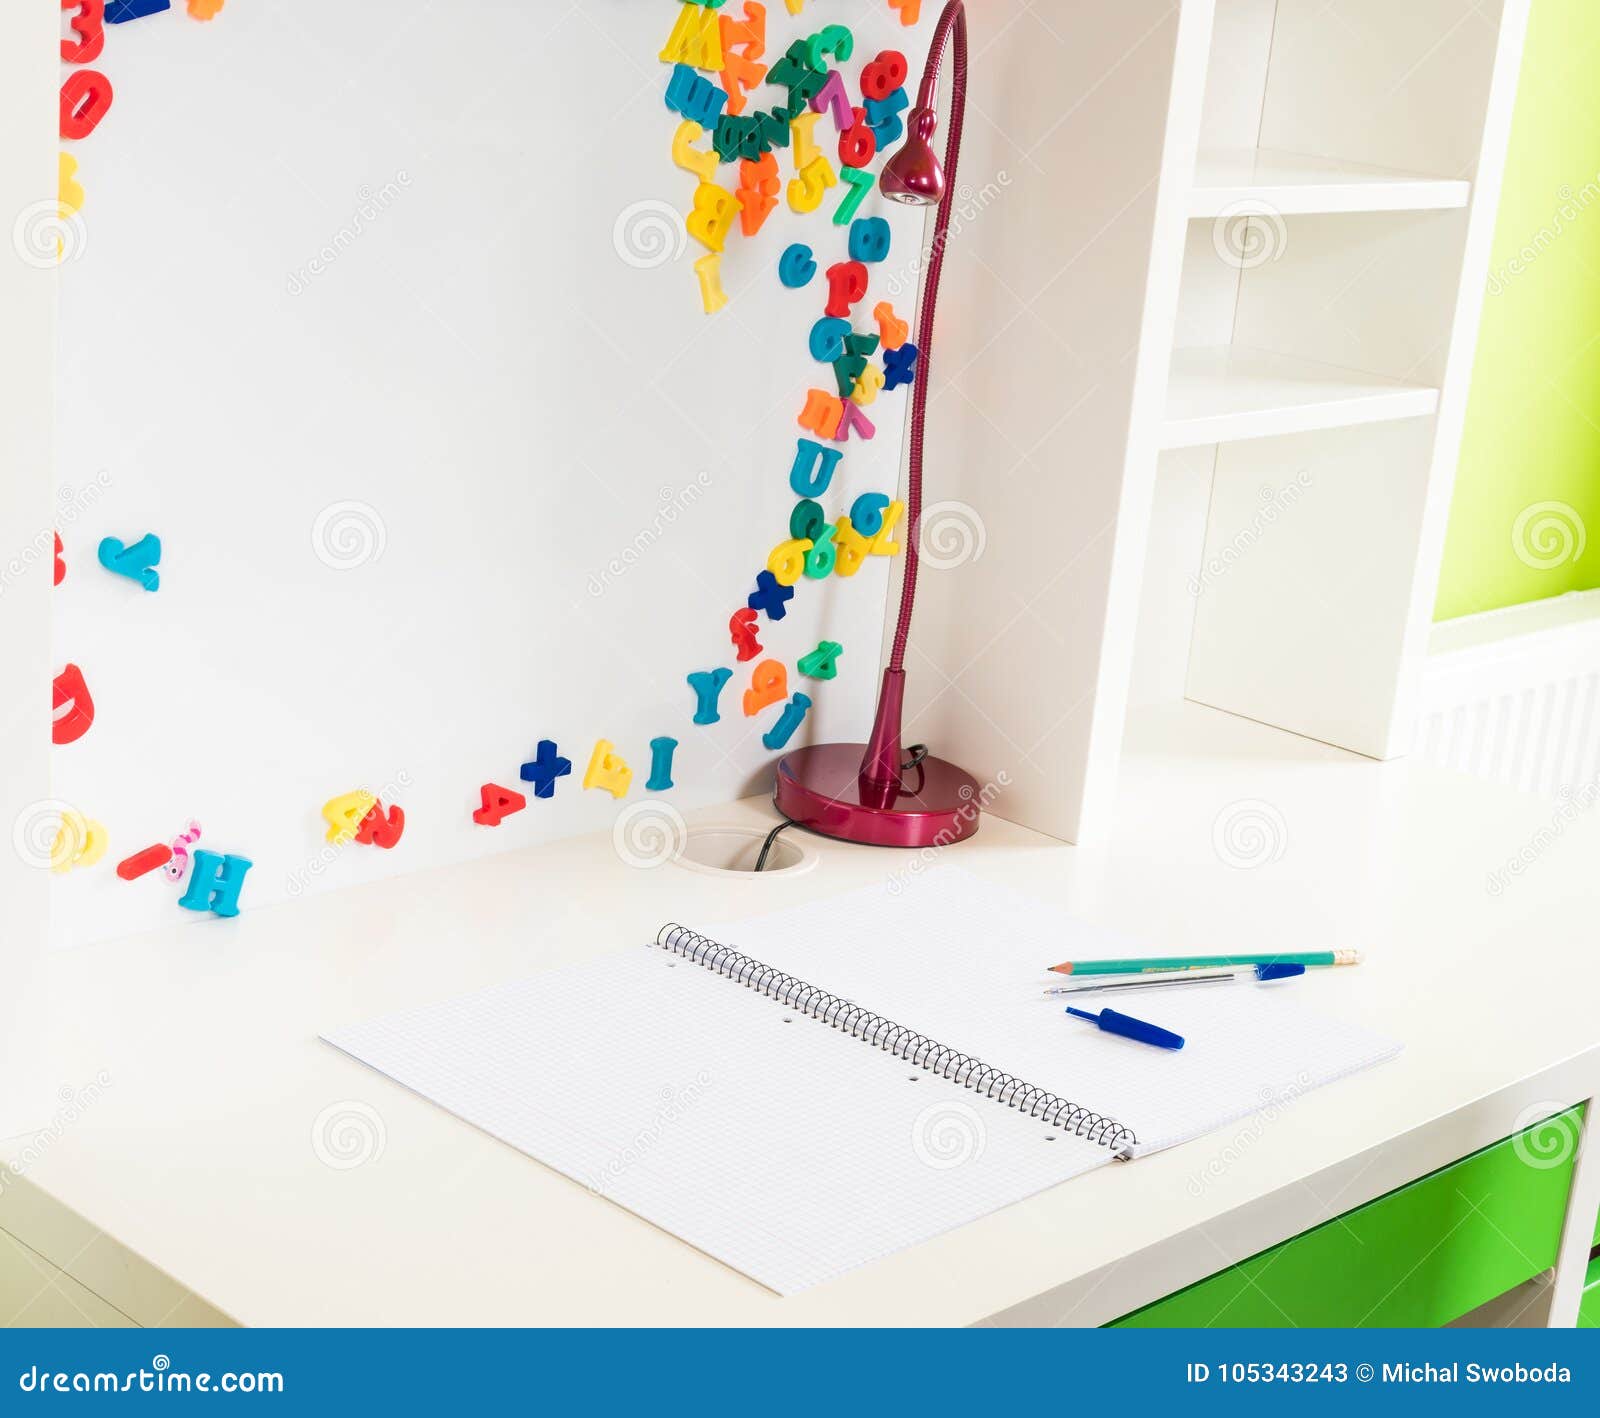 A Child S School Desk With School Supplies Stock Image Image Of